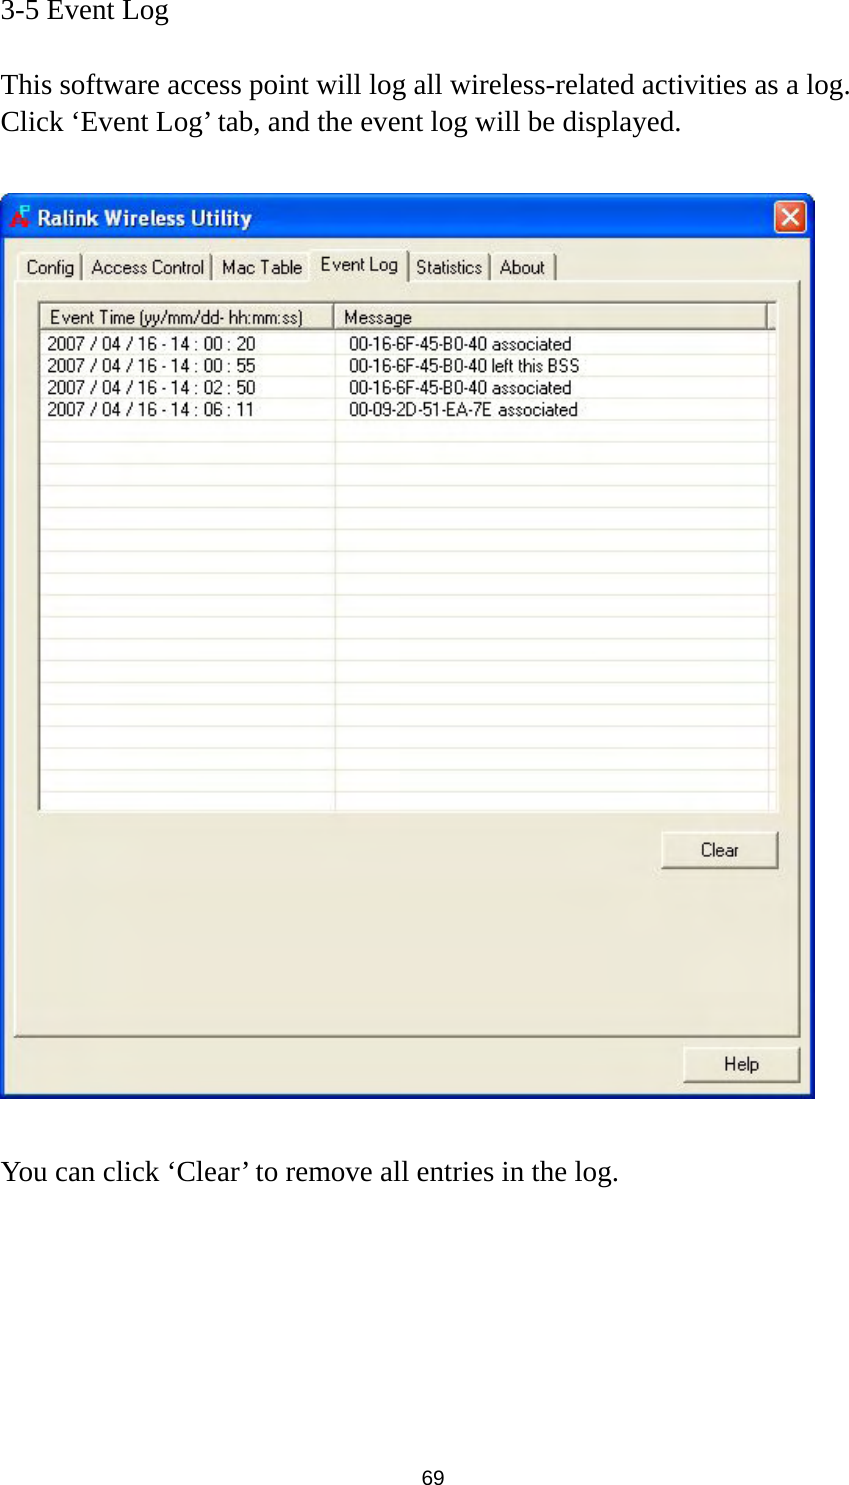  69 3-5 Event Log  This software access point will log all wireless-related activities as a log. Click ‘Event Log’ tab, and the event log will be displayed.    You can click ‘Clear’ to remove all entries in the log. 